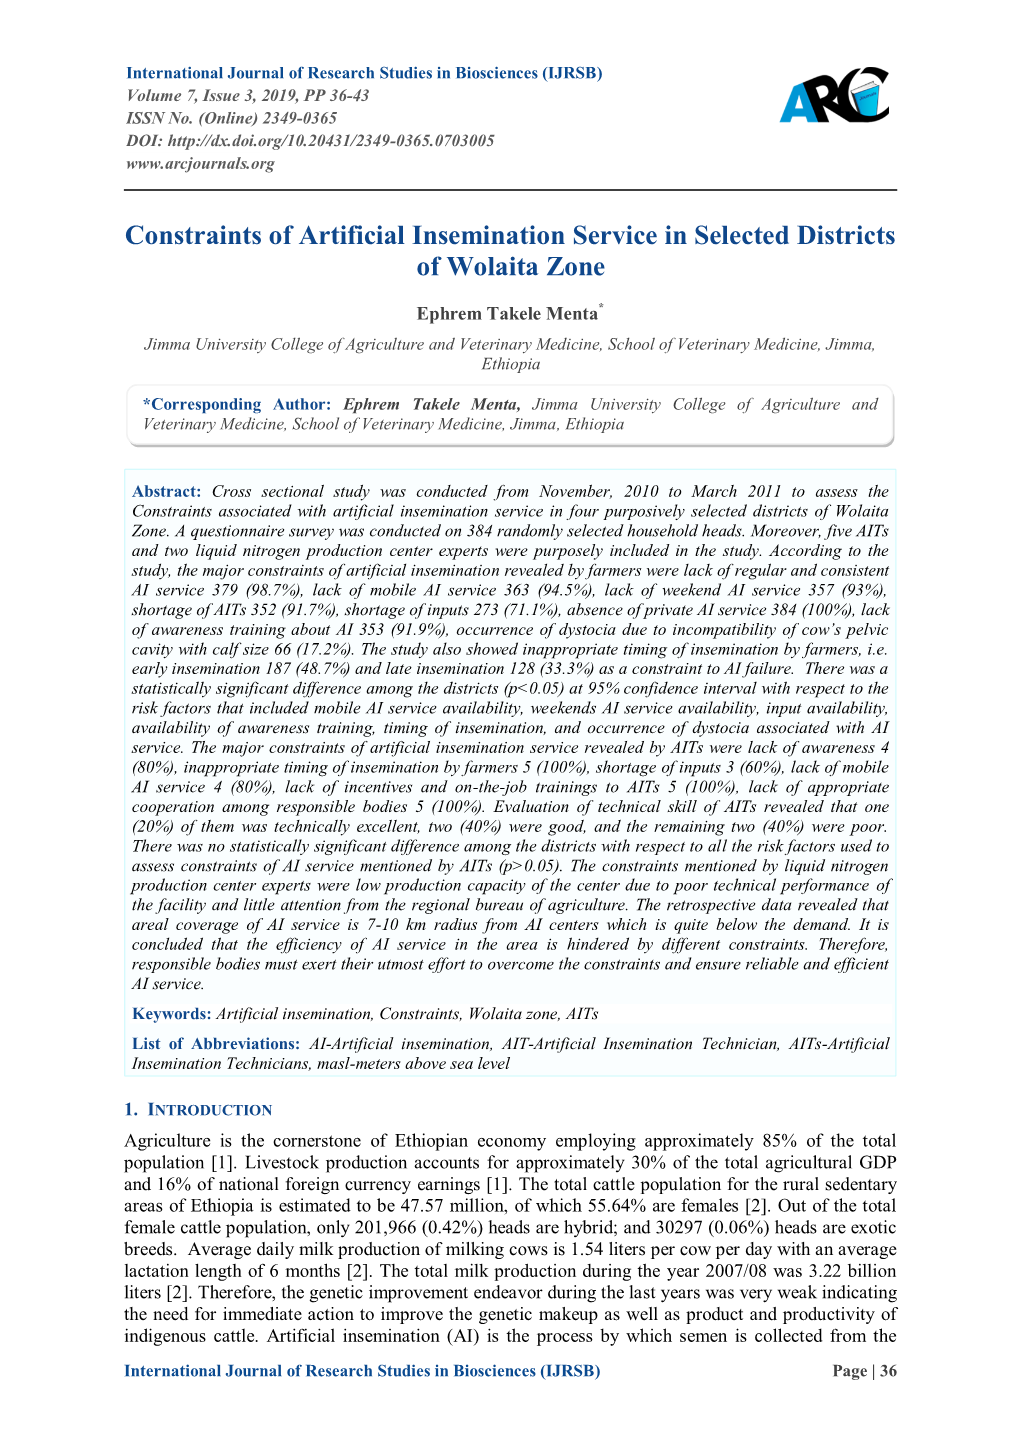 Constraints of Artificial Insemination Service in Selected Districts of Wolaita Zone